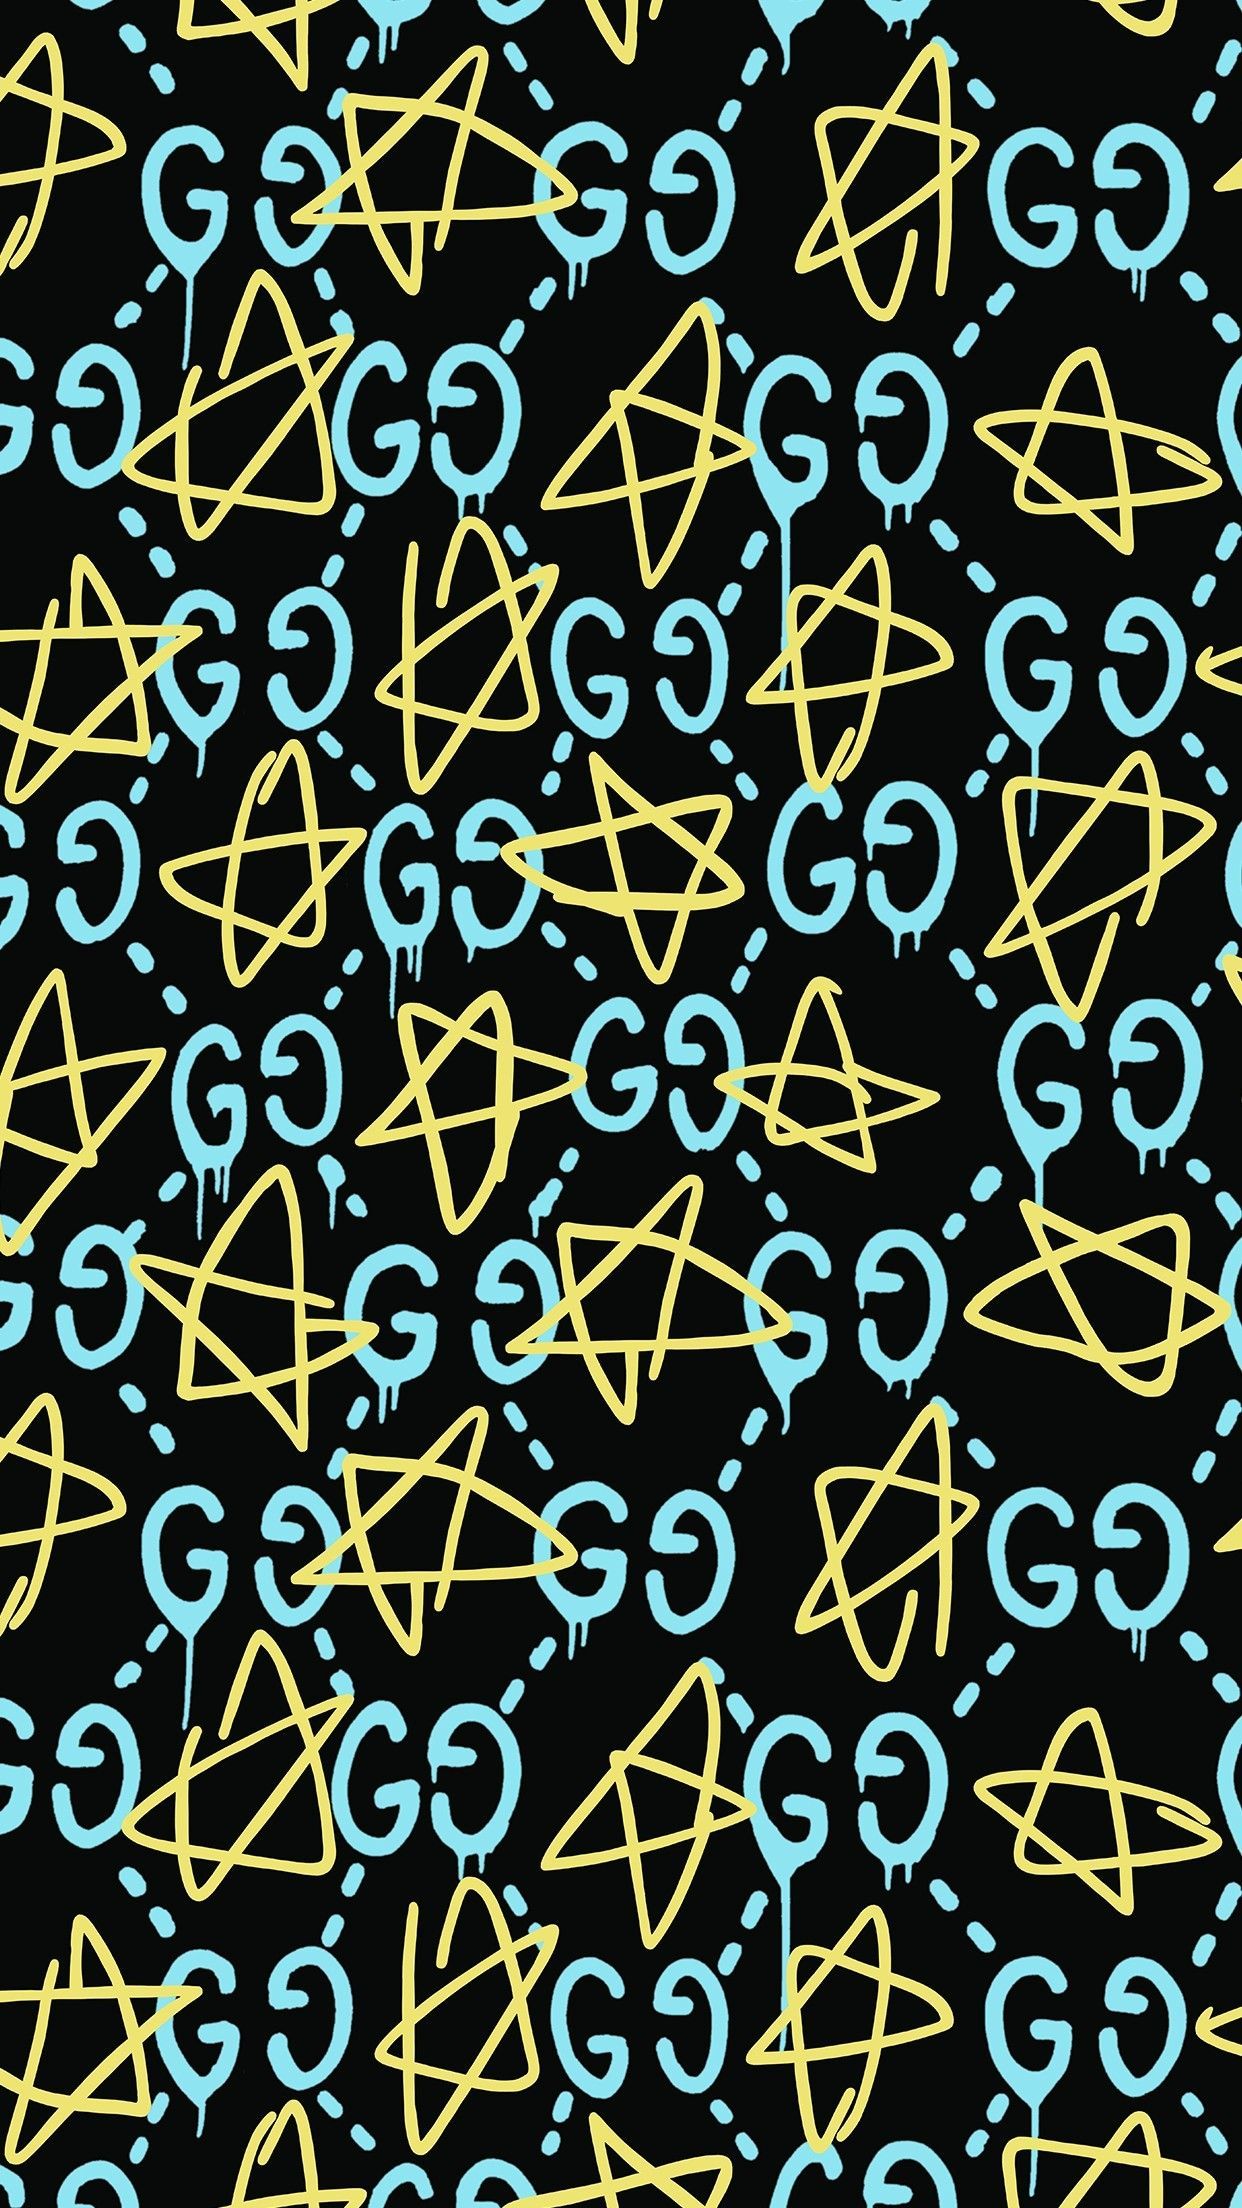 Gucci Ghost Wallpapers